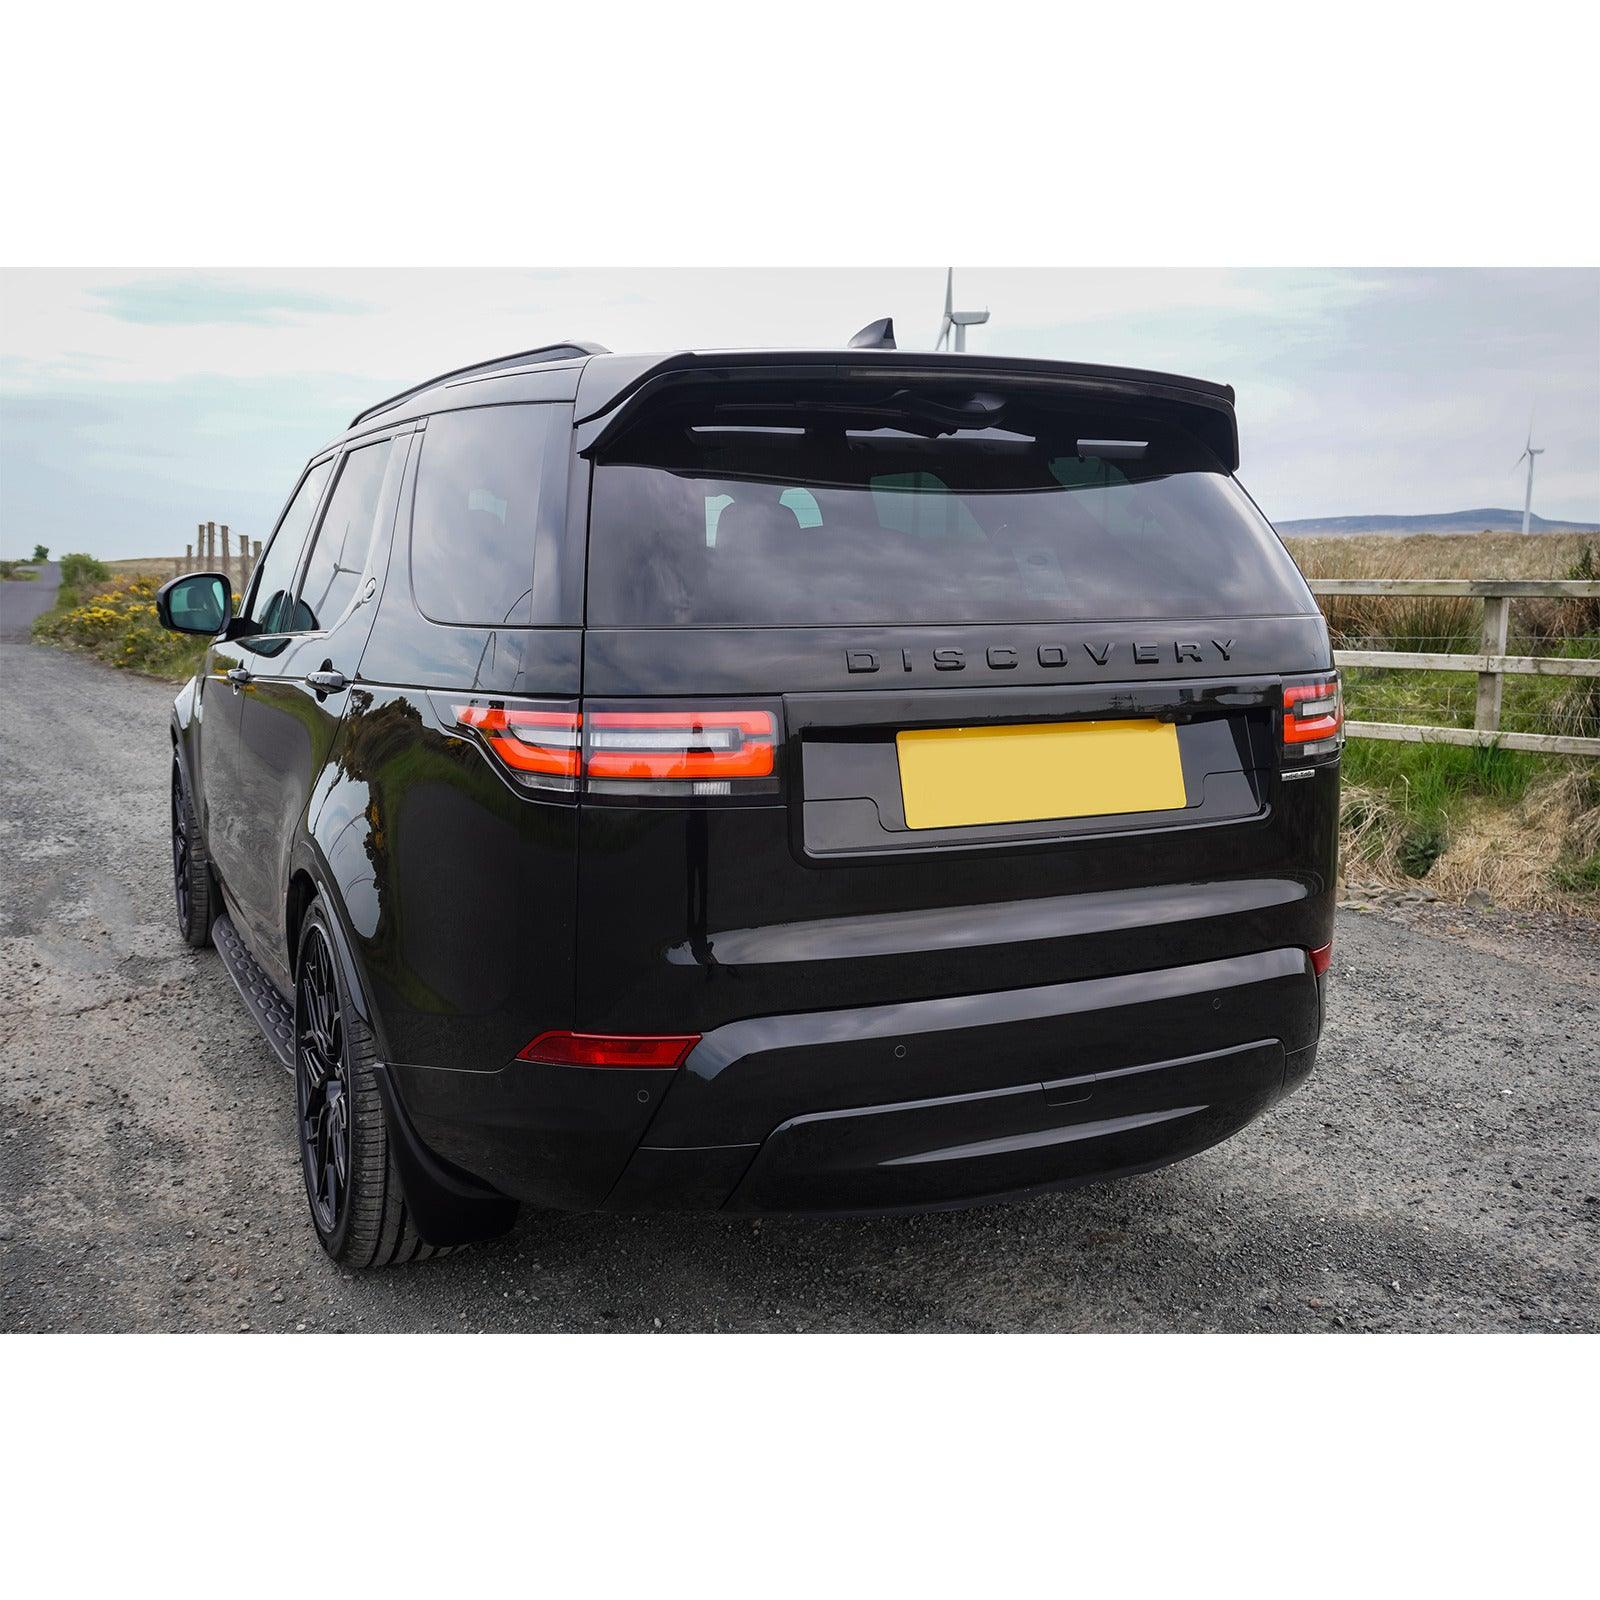 LAND ROVER DISCOVERY 5 2017 ON REAR TAILGATE NUMBER PLATE MOULDING ST LOOK - GLOSS BLACK - Storm Xccessories2